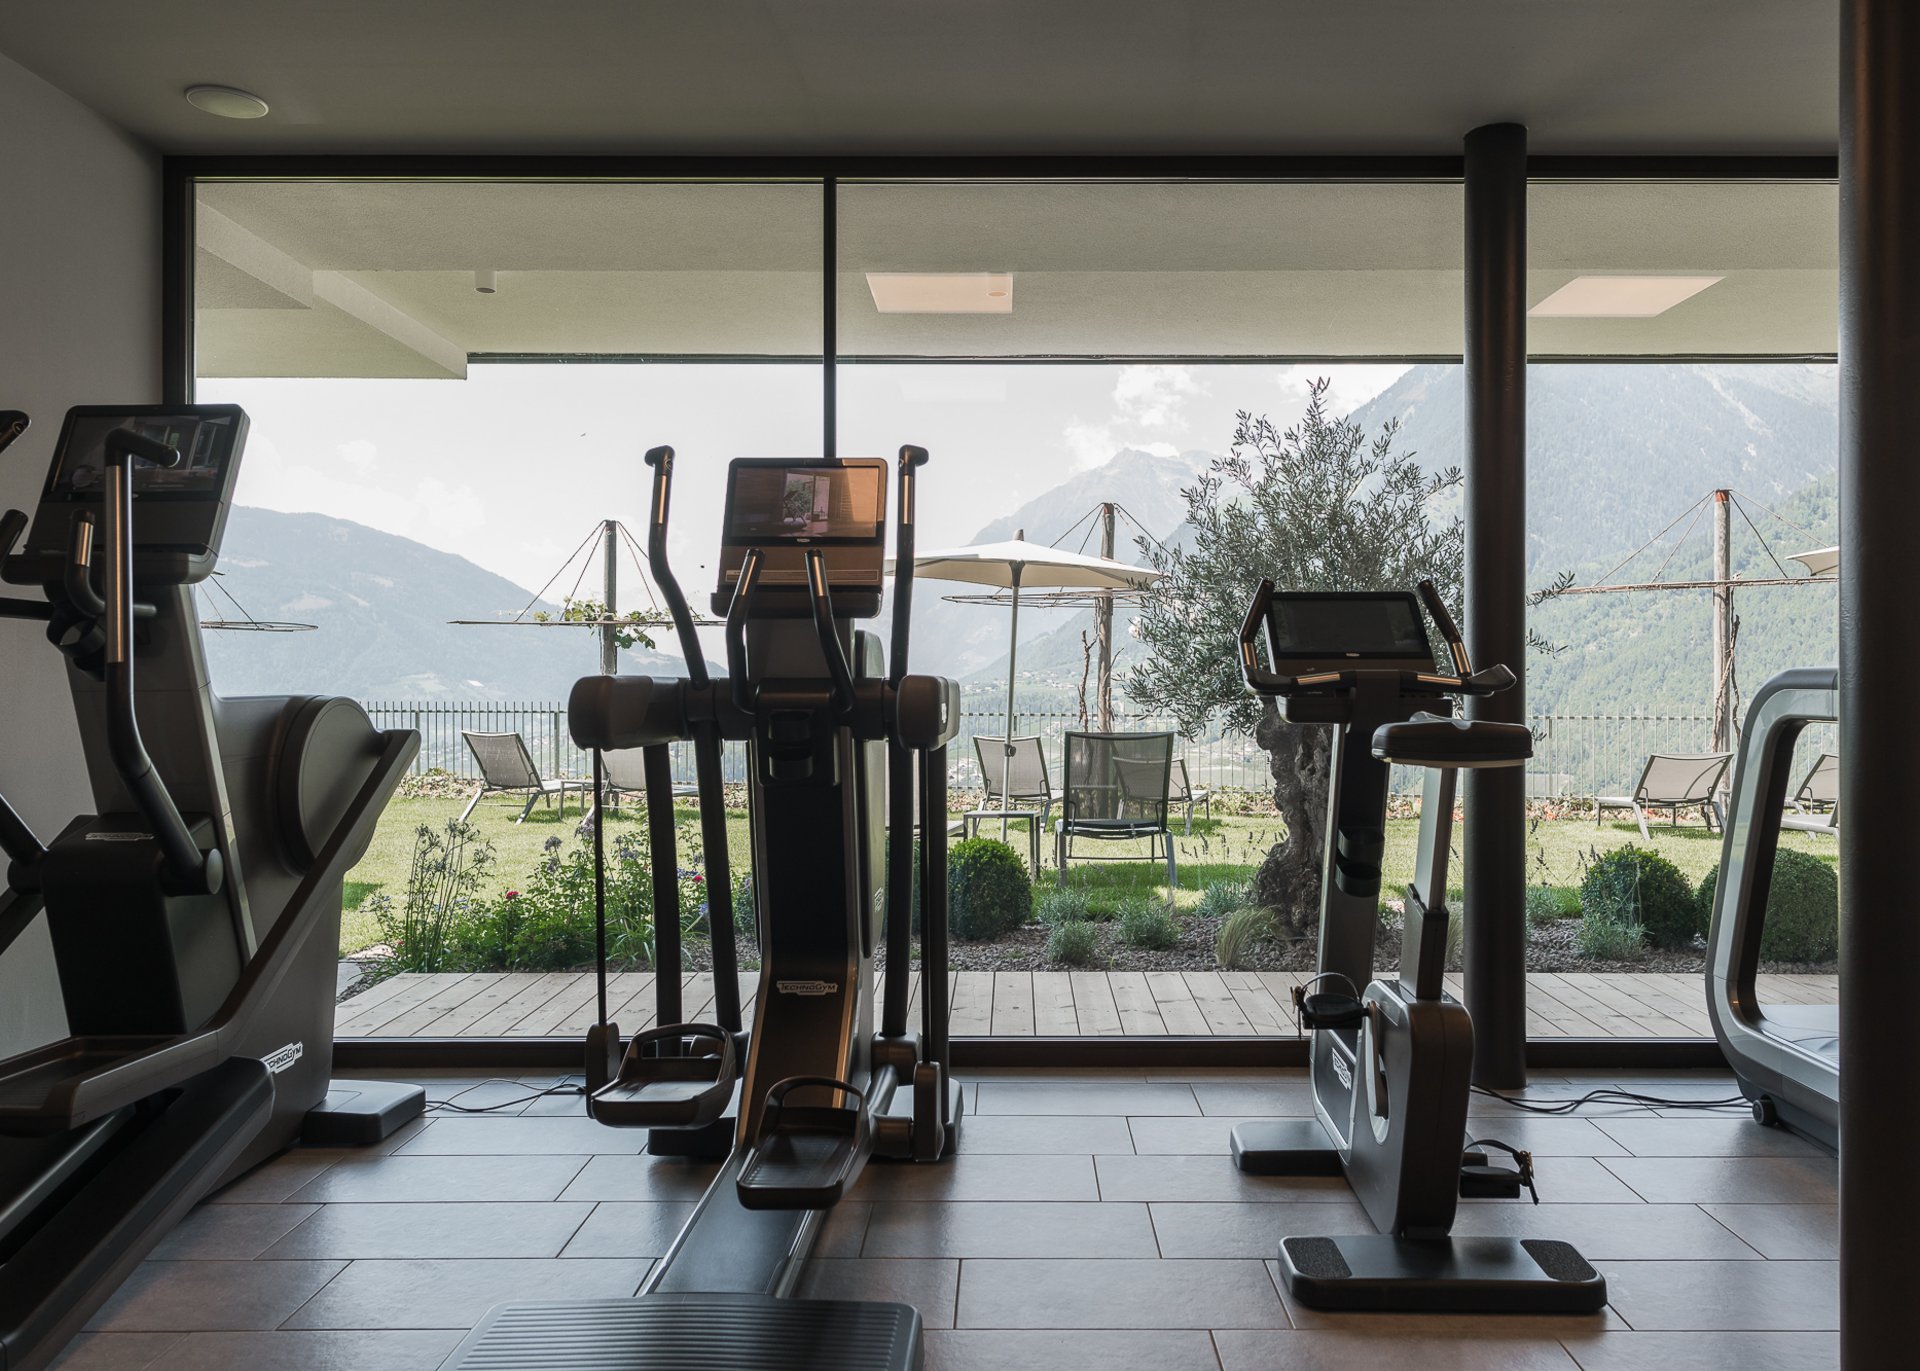 The Hotel Alpin: your fitness paradise